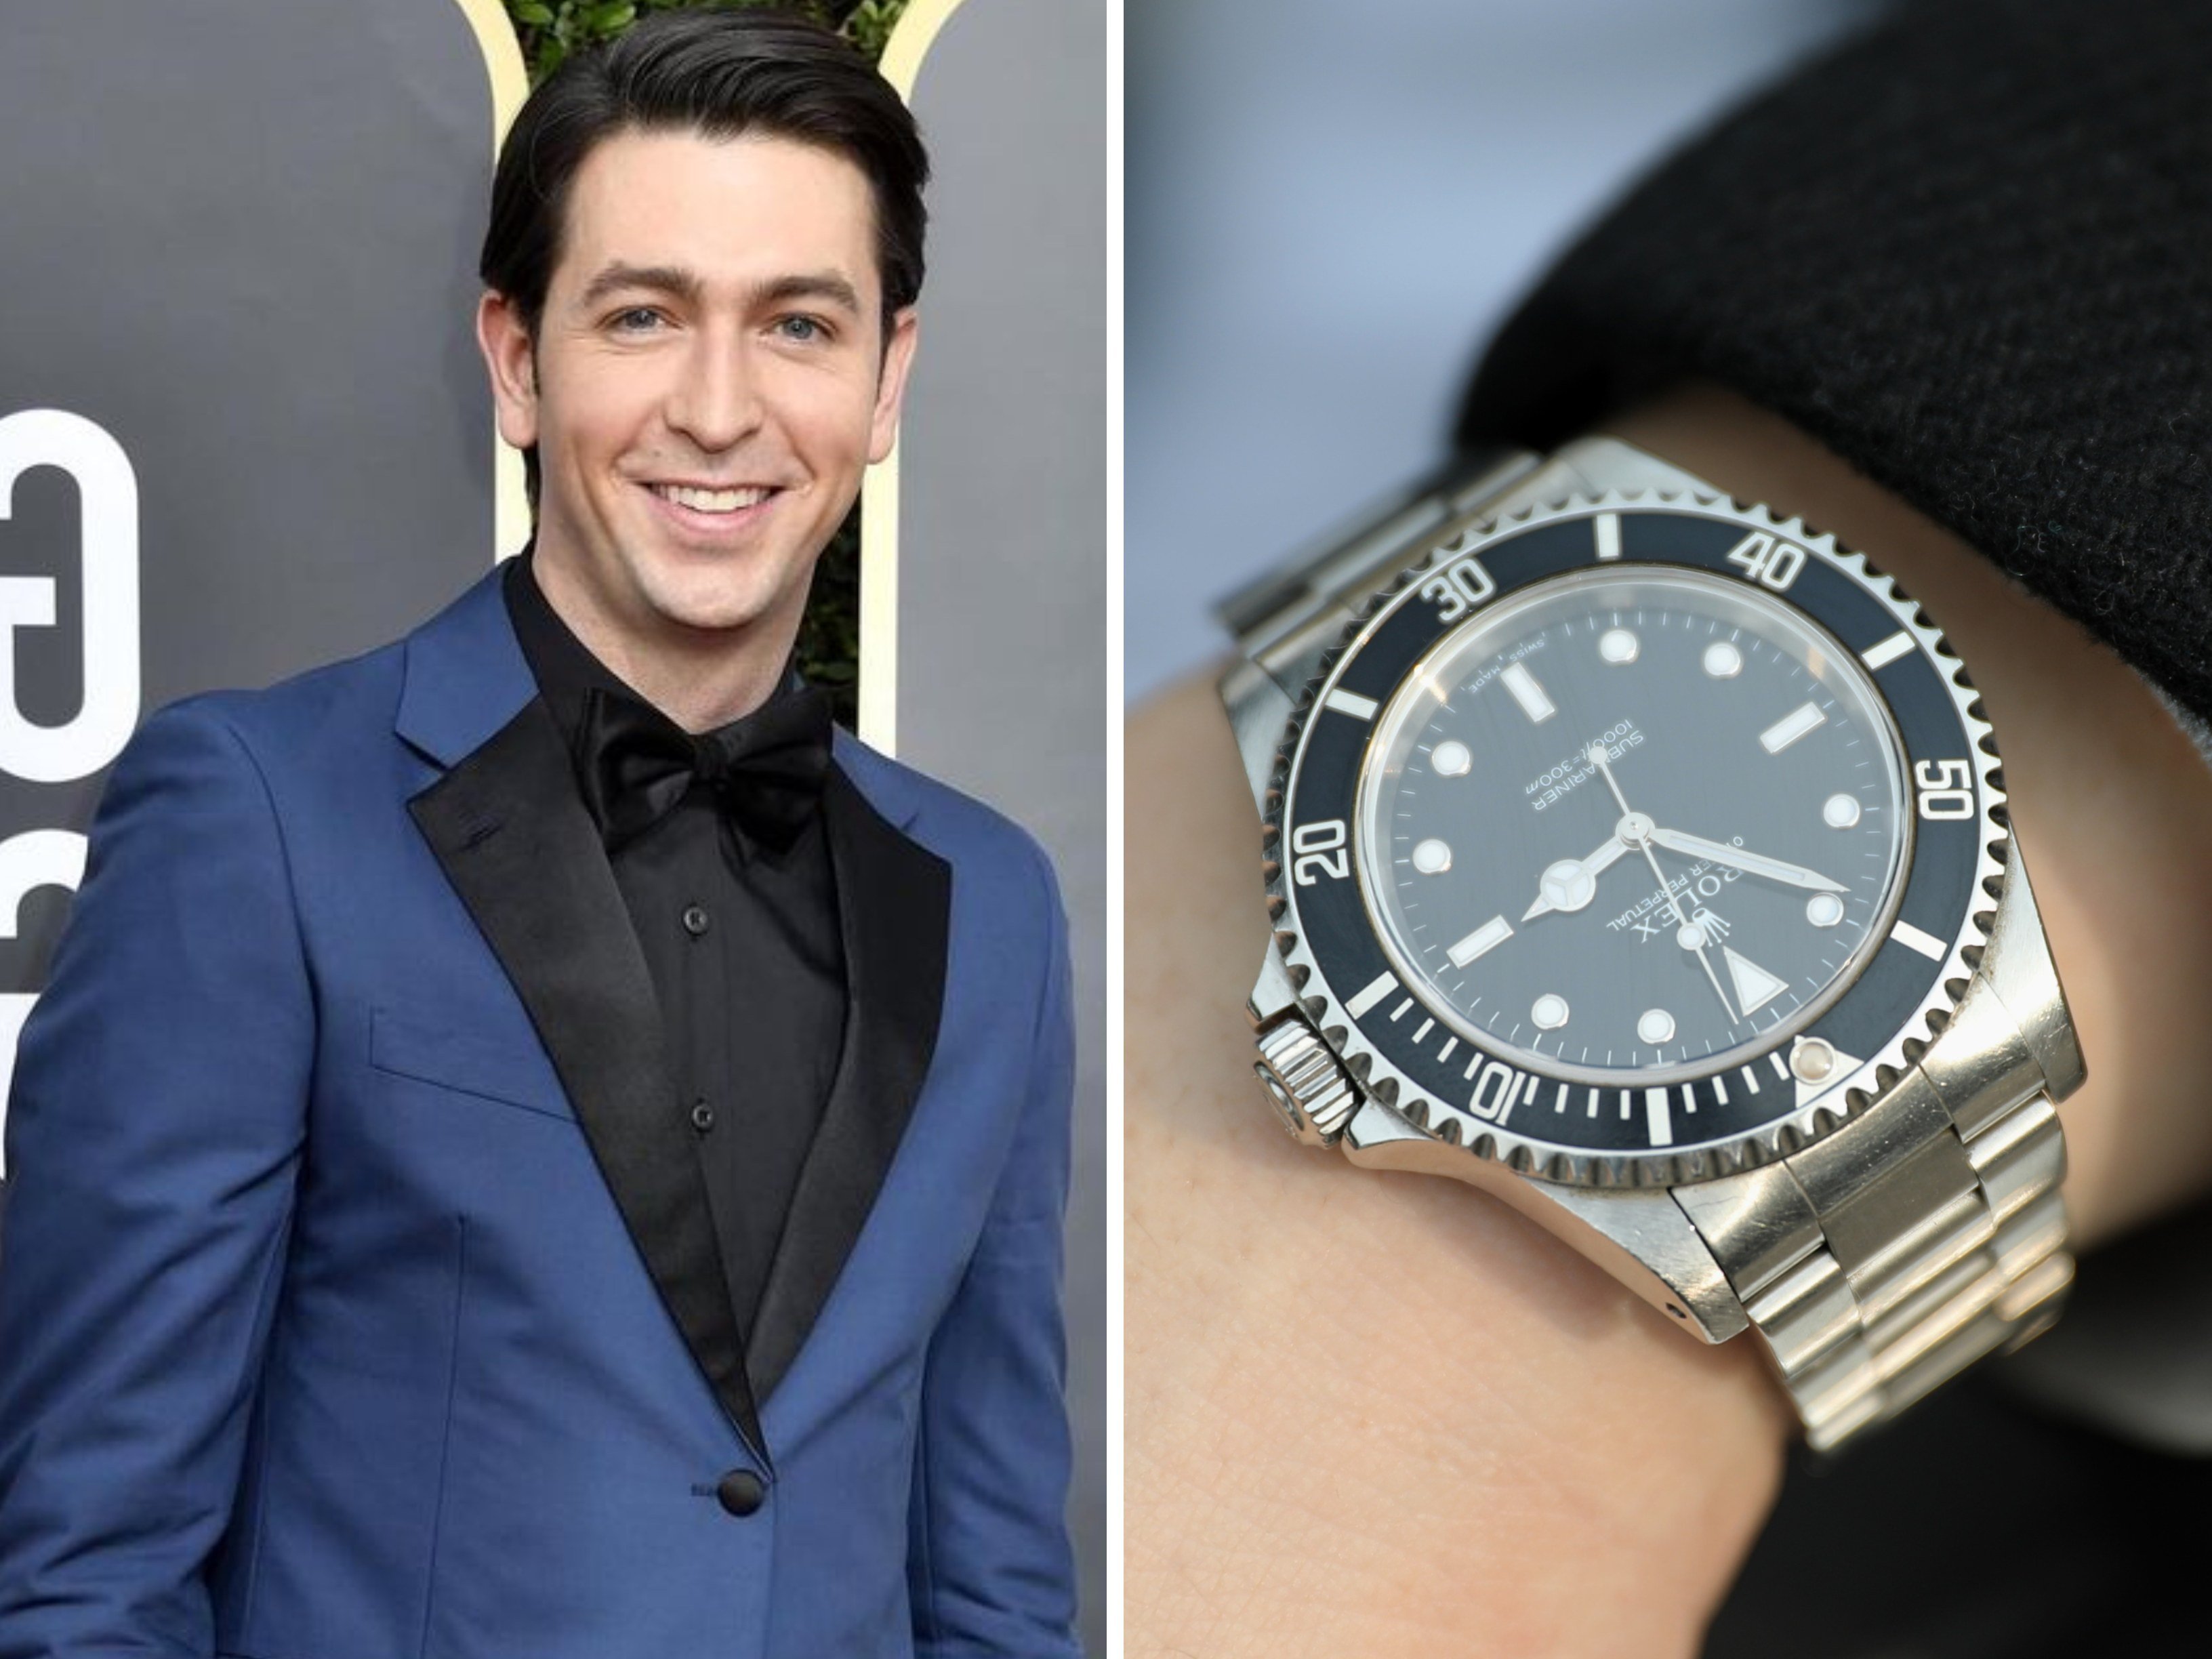 Nicholas Braun plays Cousin Greg on HBO hit series Succession; he admitted that he only bought himself a Rolex after being on the show. Photo: @nicholasbraun/Instagram, SCMP Archive